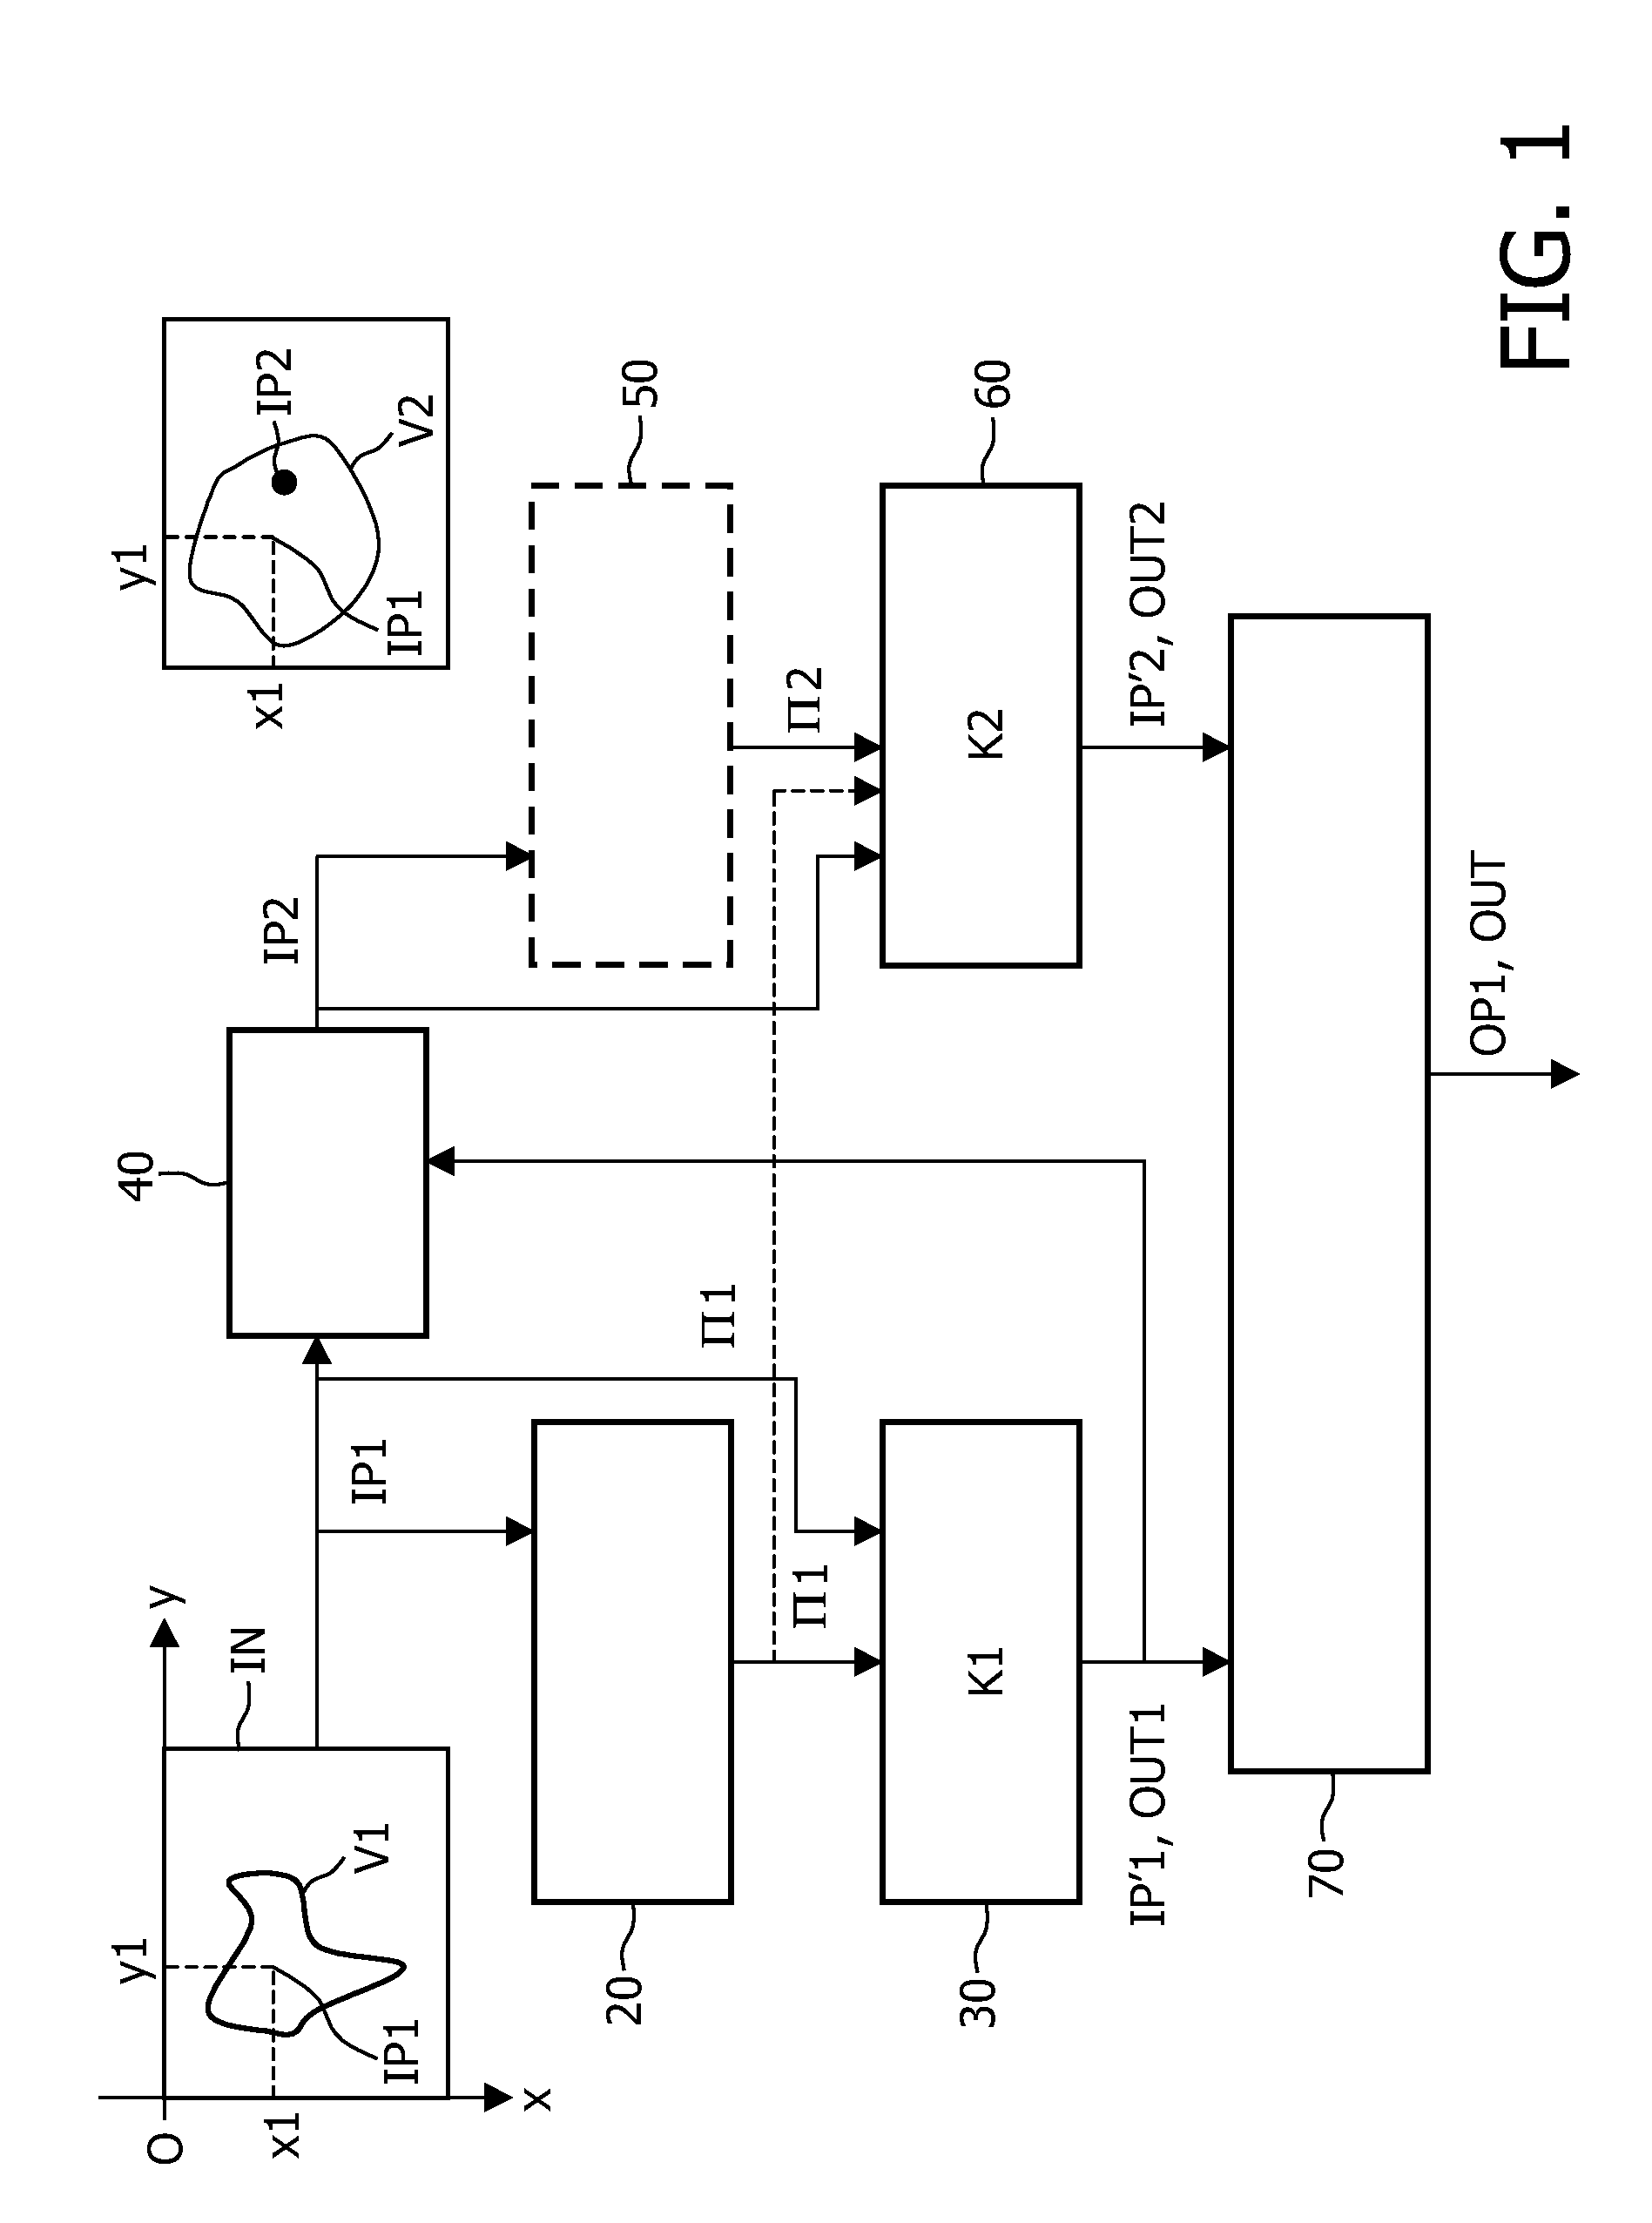 Method and System for Filtering Elongated Features